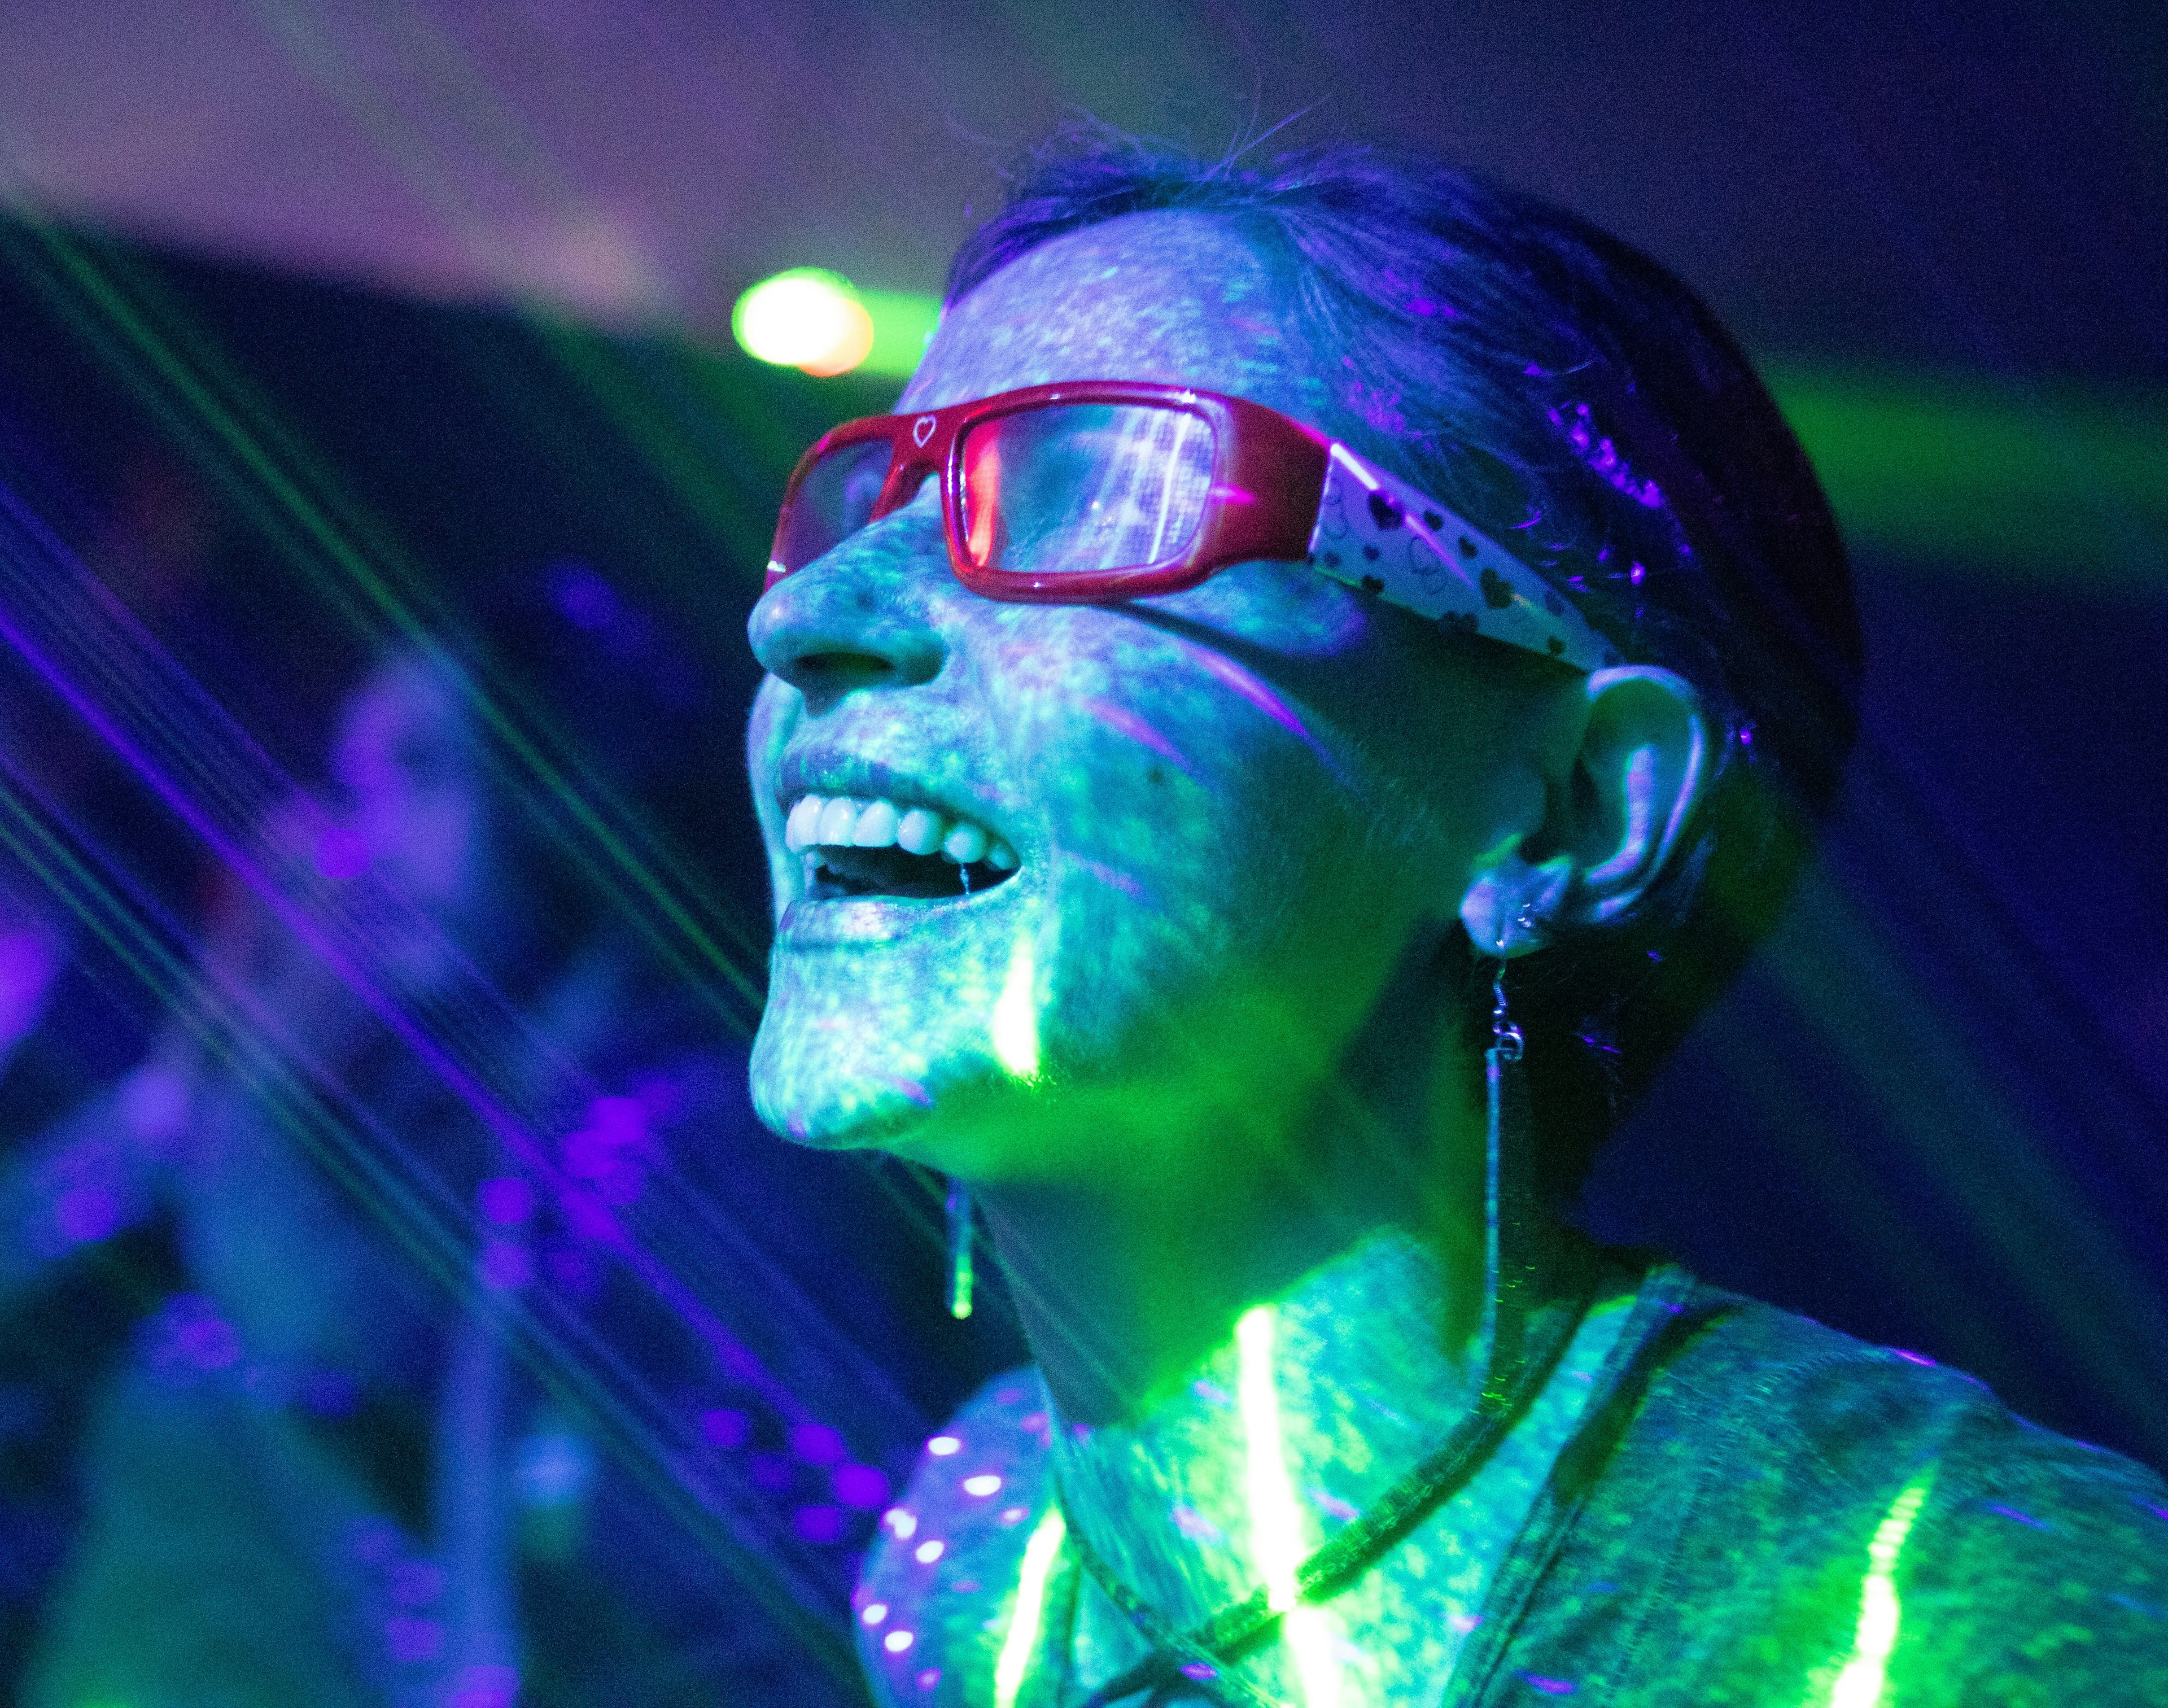 a person wearing glasses with lots of colored lights shining on them